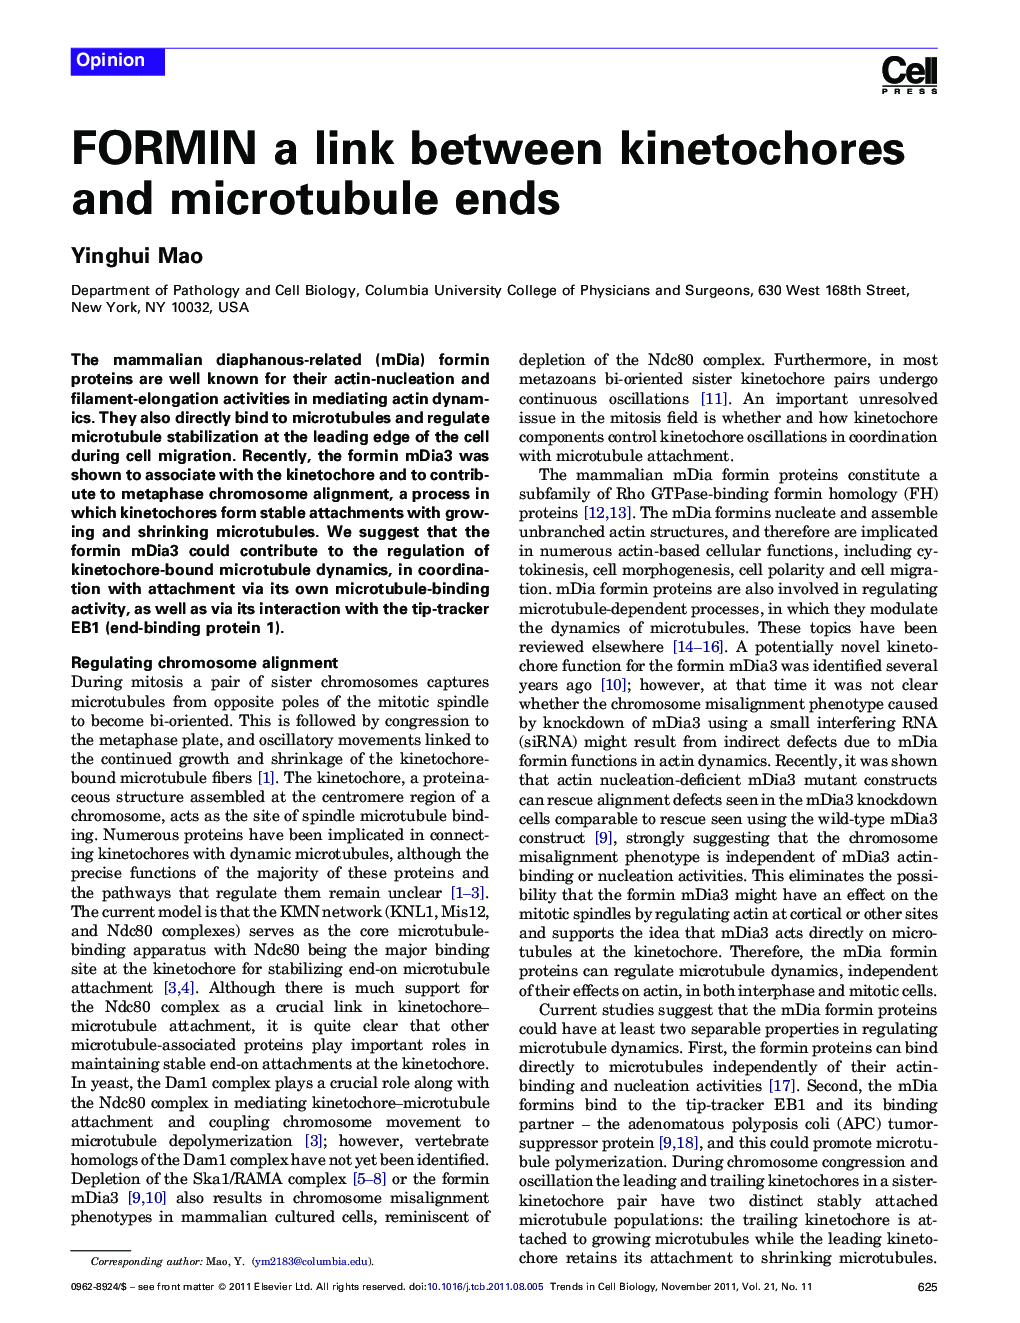 FORMIN a link between kinetochores and microtubule ends